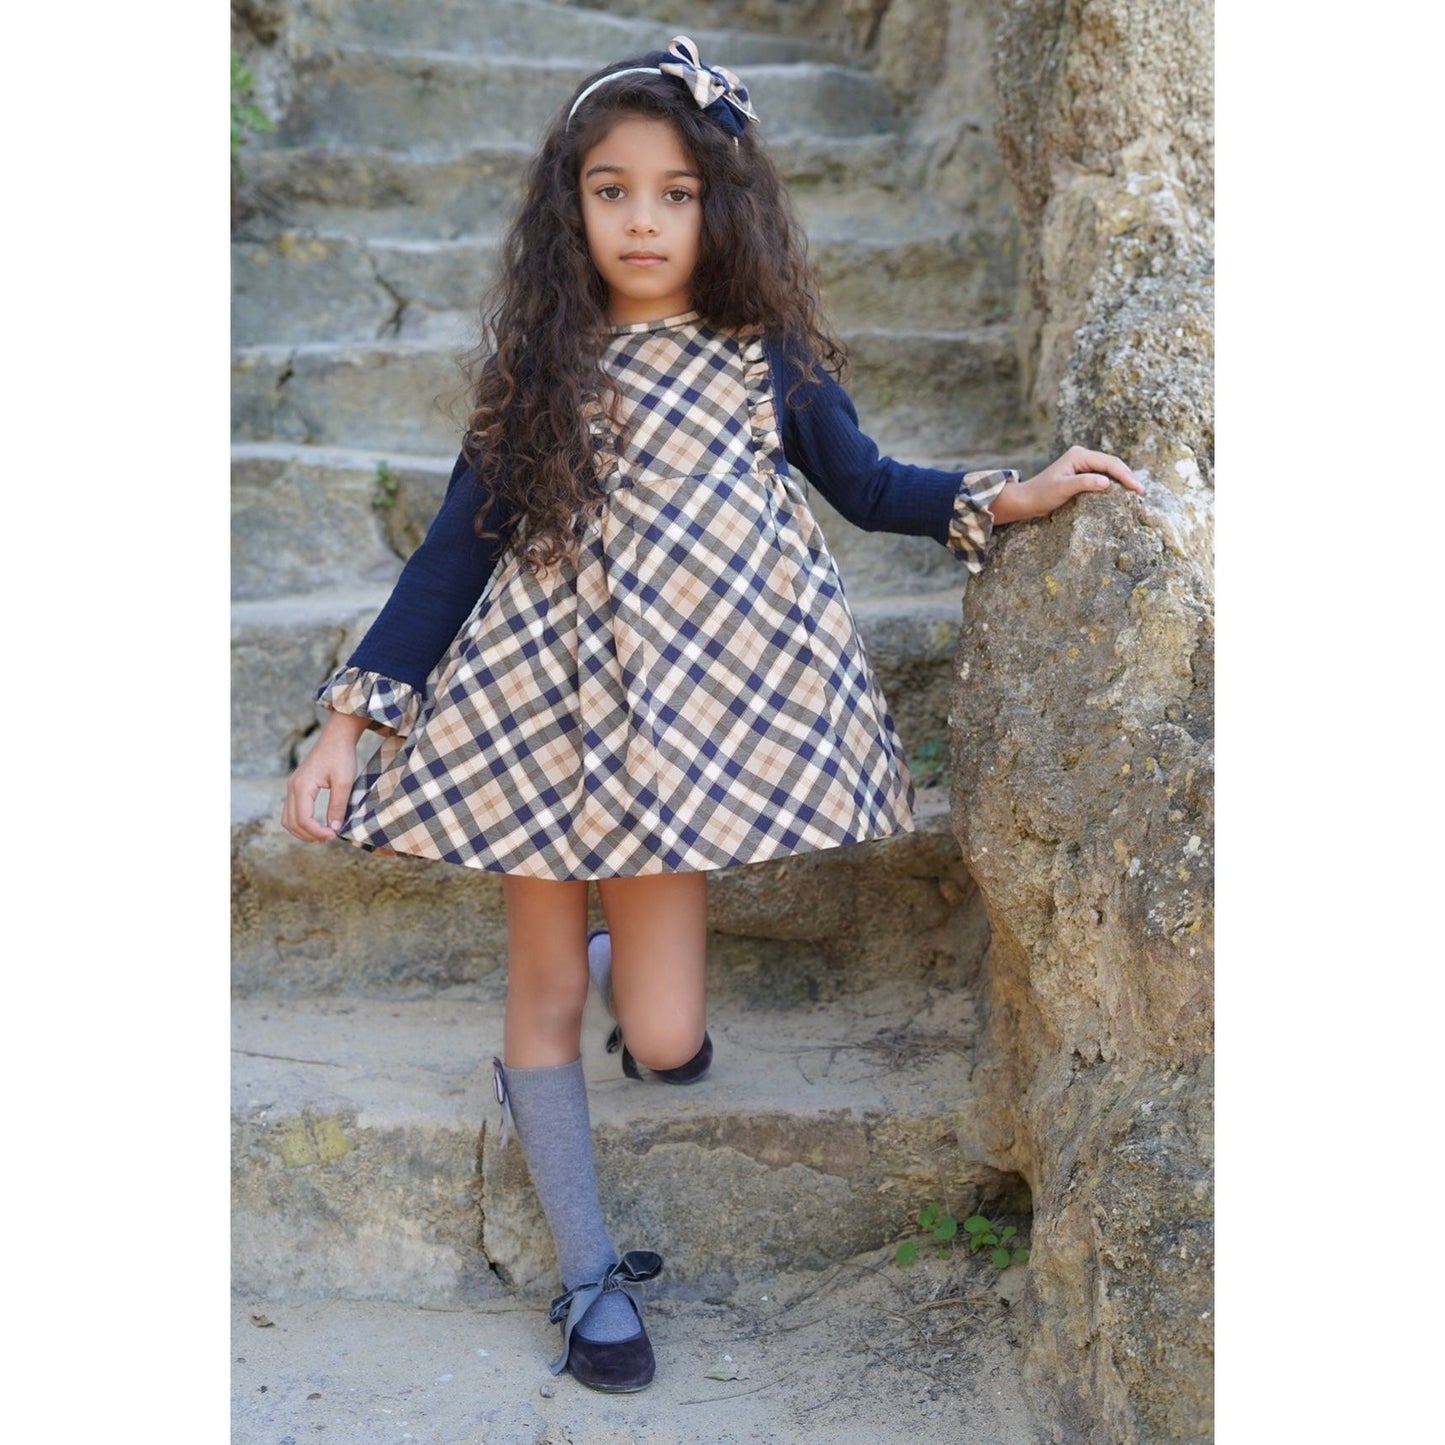 Beige And Navy Checked Dress 3221 - Lala Kids 